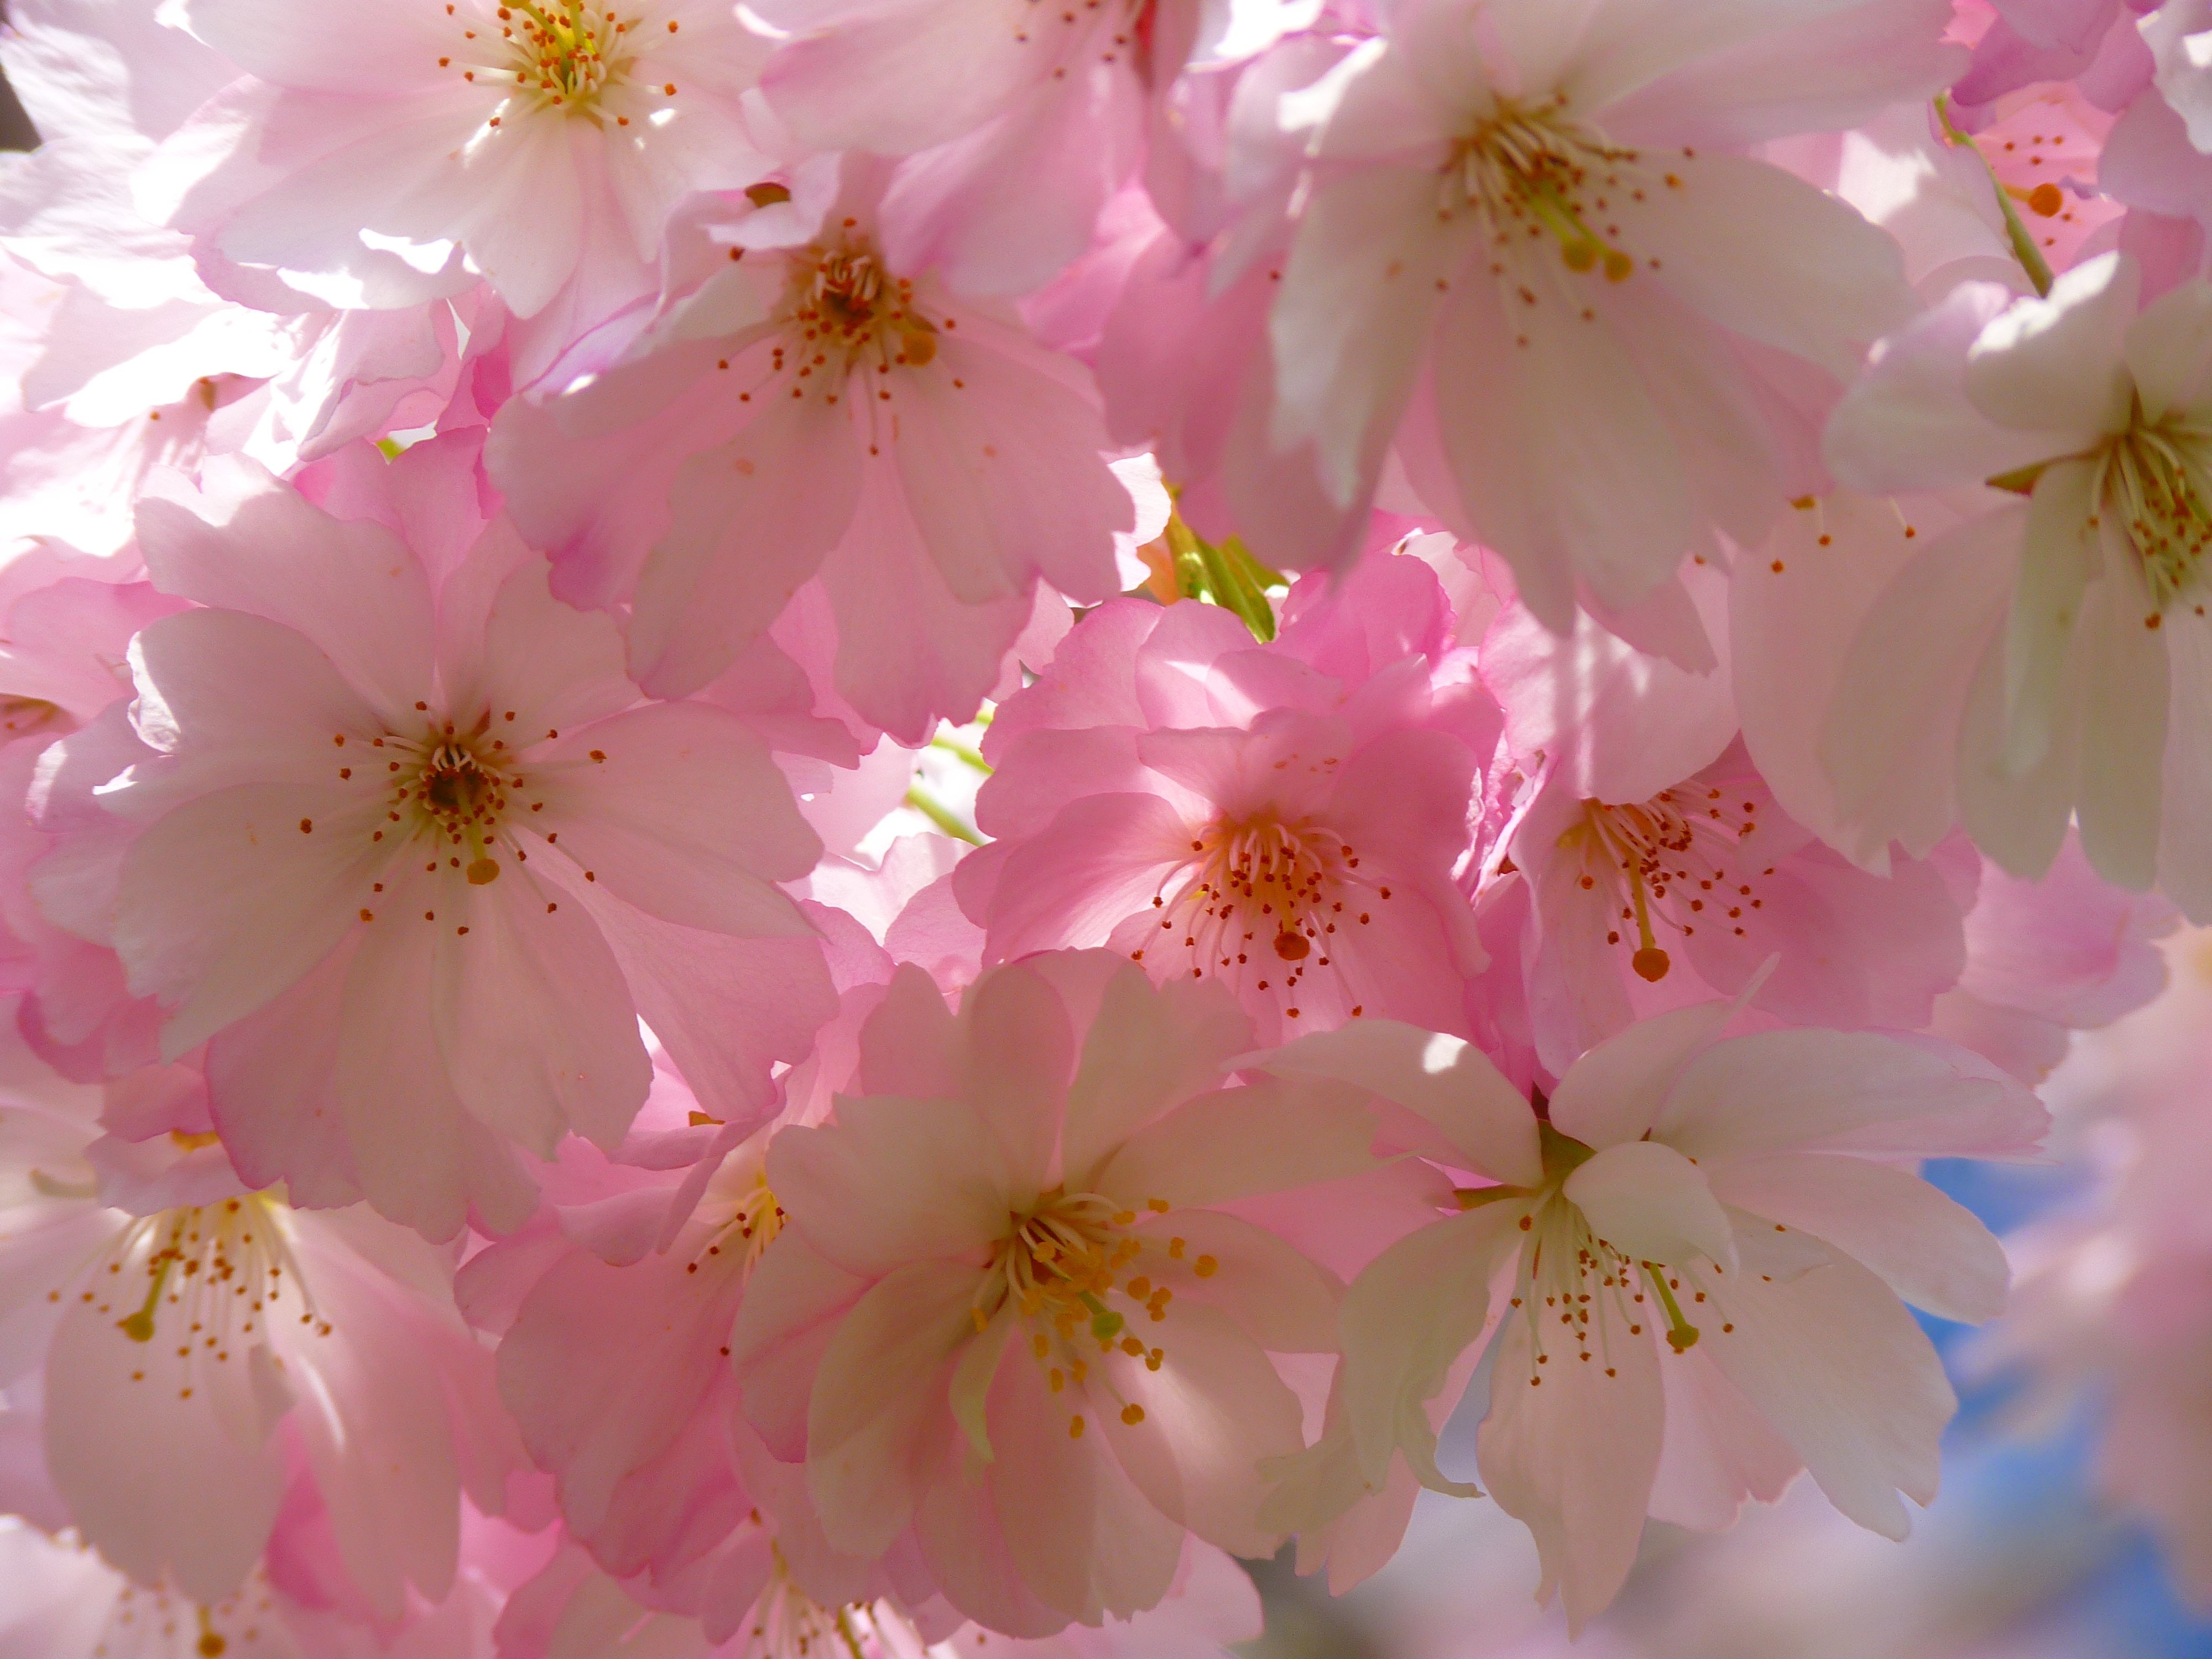 White and pink flowers photo